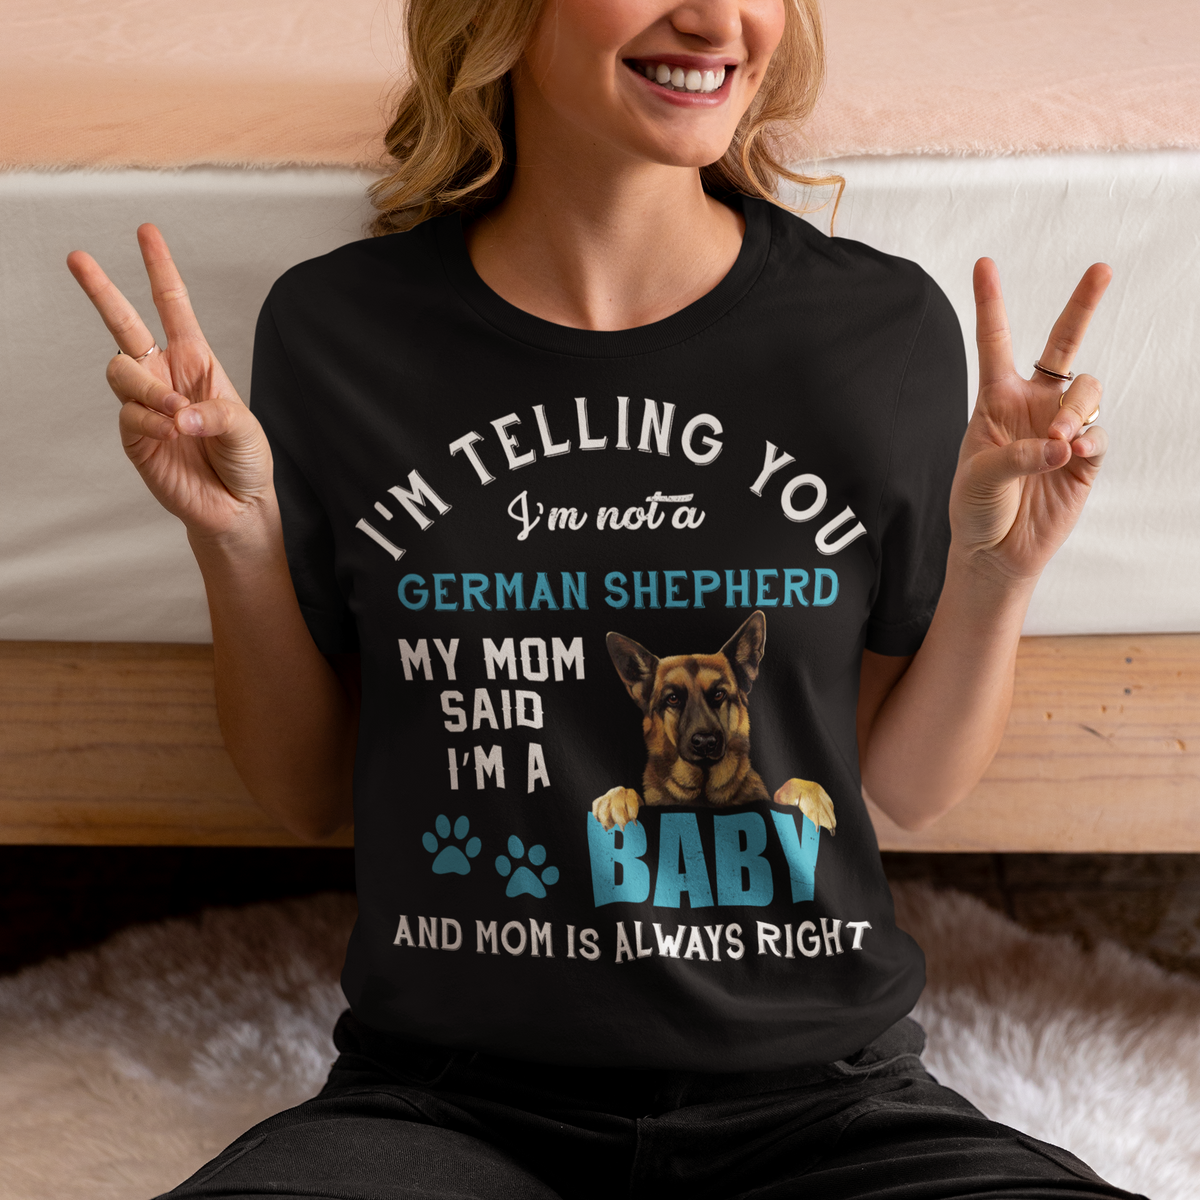 I'm Telling You I'm Not a German Shepherd T Shirt for Dog Lover